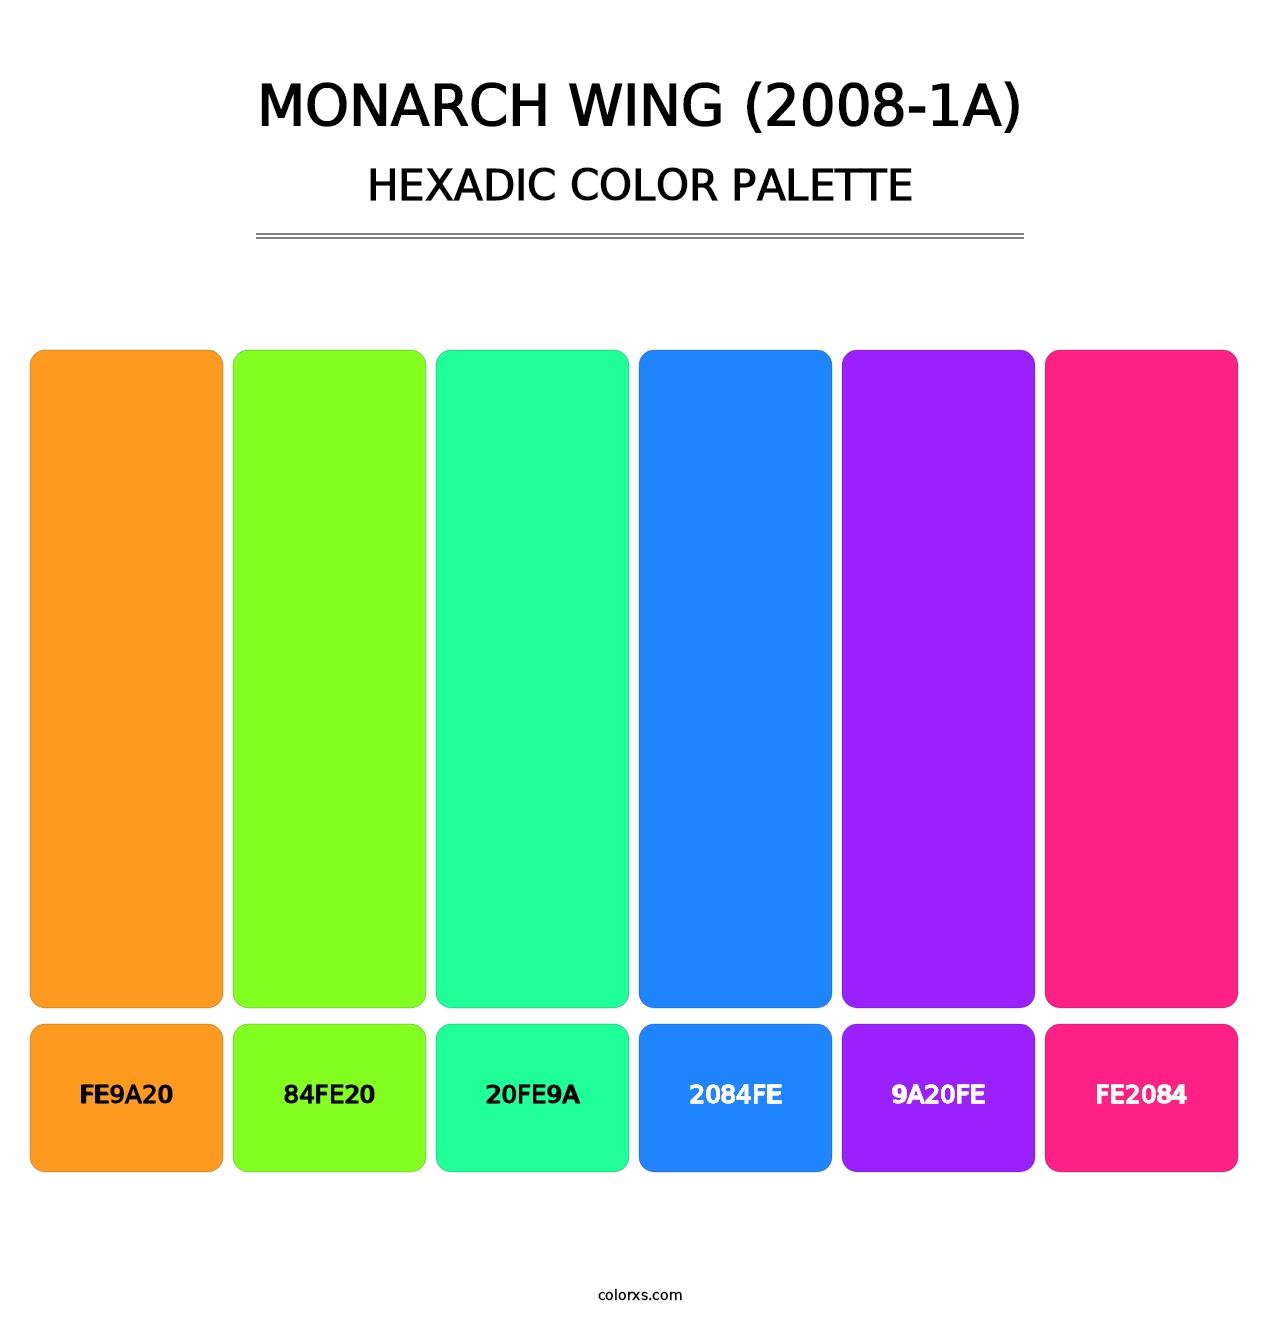 Monarch Wing (2008-1A) - Hexadic Color Palette